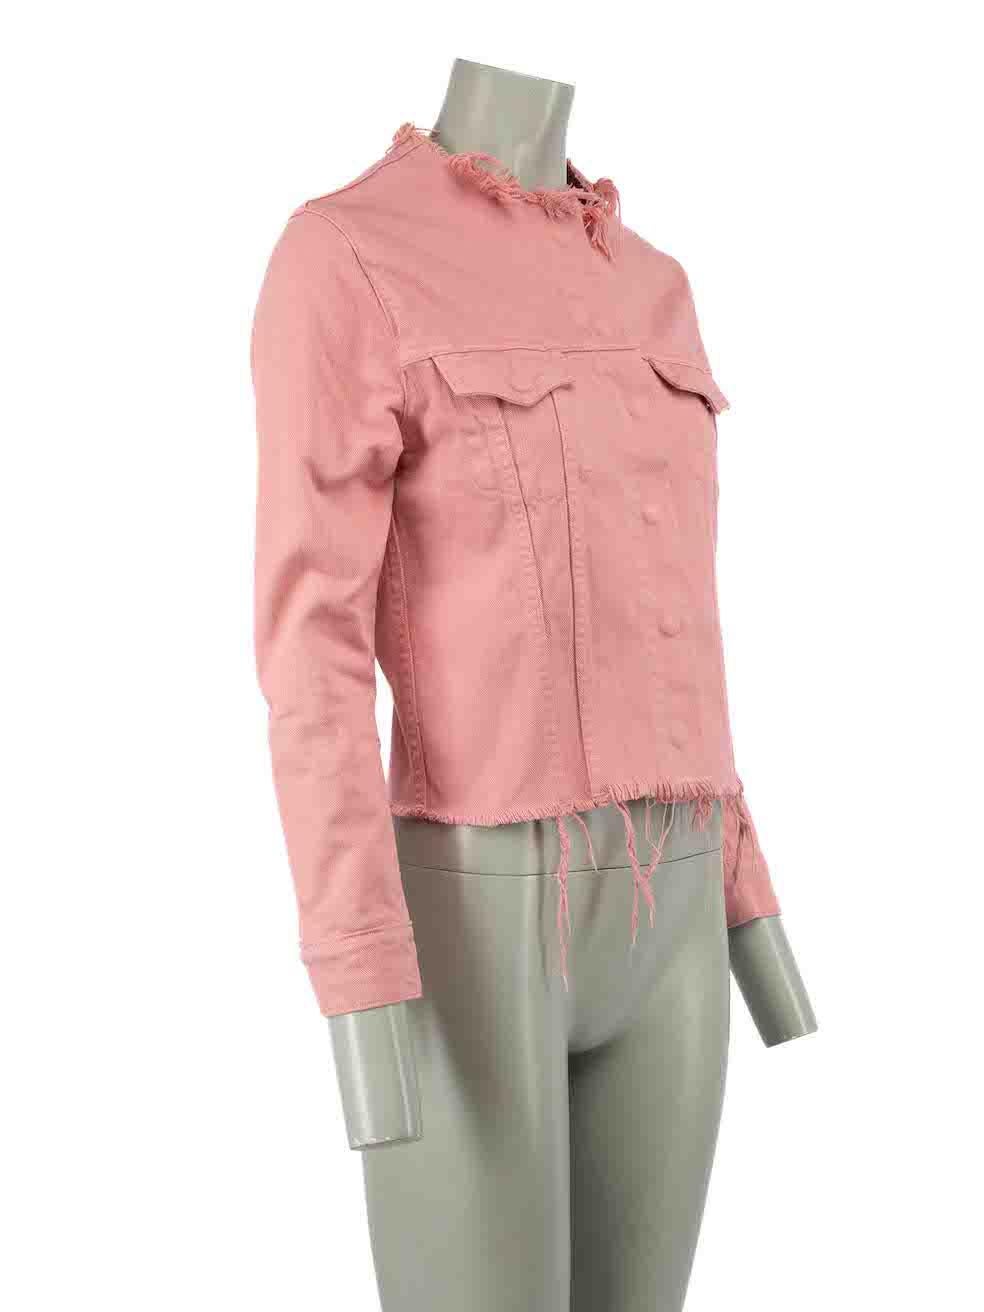 CONDITION is Very Good. Minor wear to jacket is evident. Light discolouration to the front on this used Marques Almeida designer resale item.
 
Details
Pink
Cotton denim
Jacket
Collarless
Frayed edge
Snap button fastening
2x Front pockets

Made in